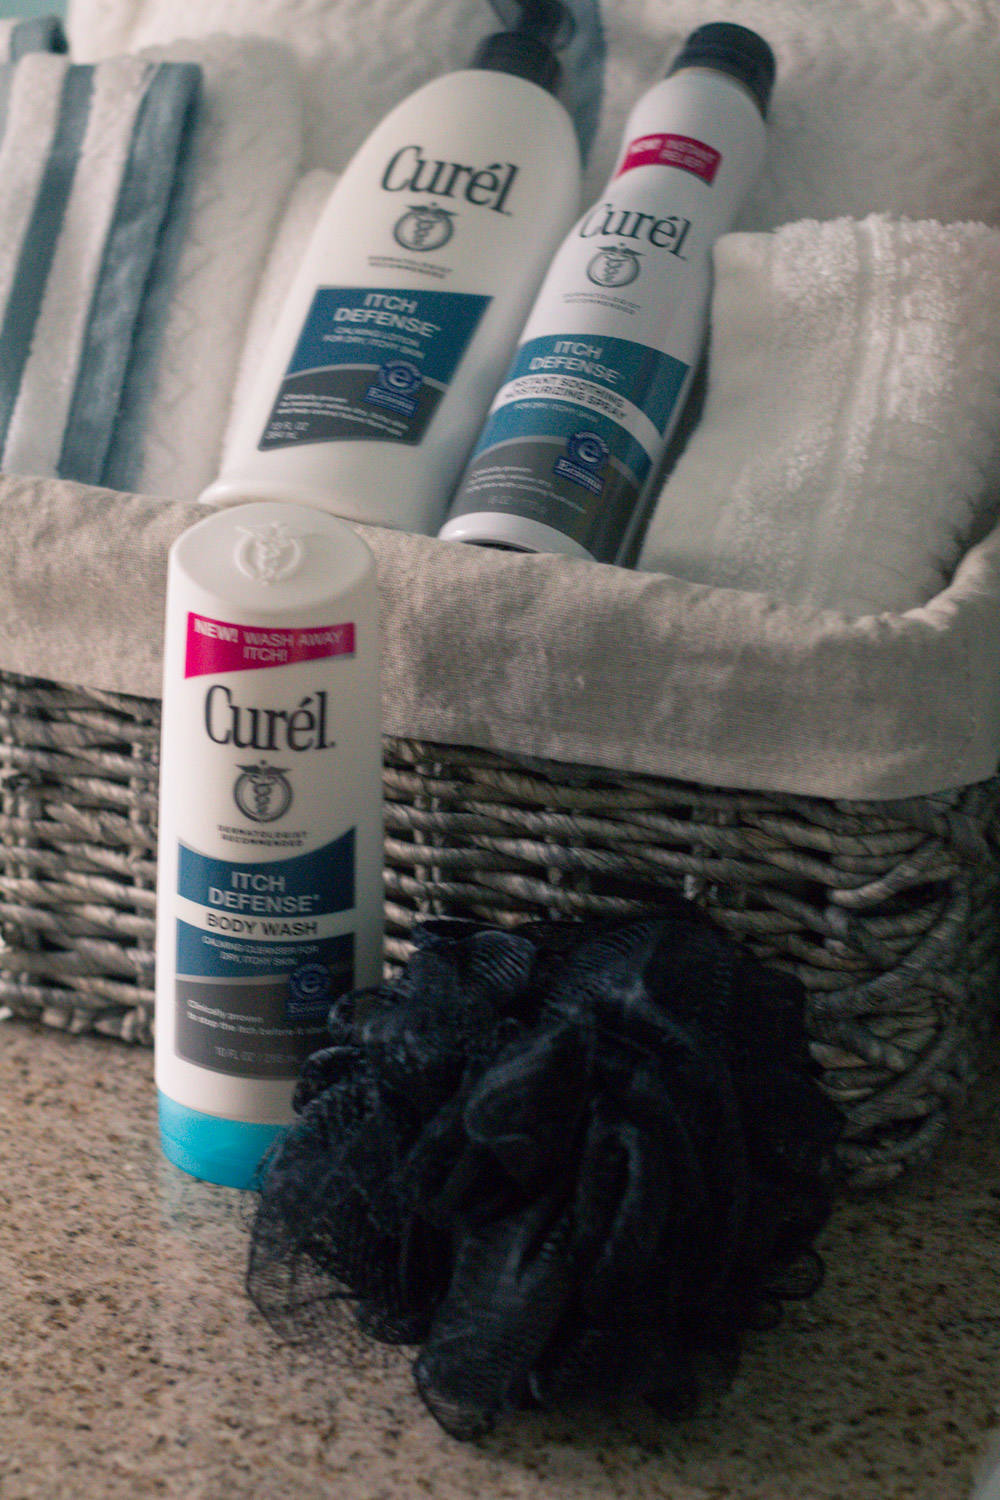 Treat dry itchy skin and eczema with Curel Itch Defense | www.BeingMelody.com| @beingmelody